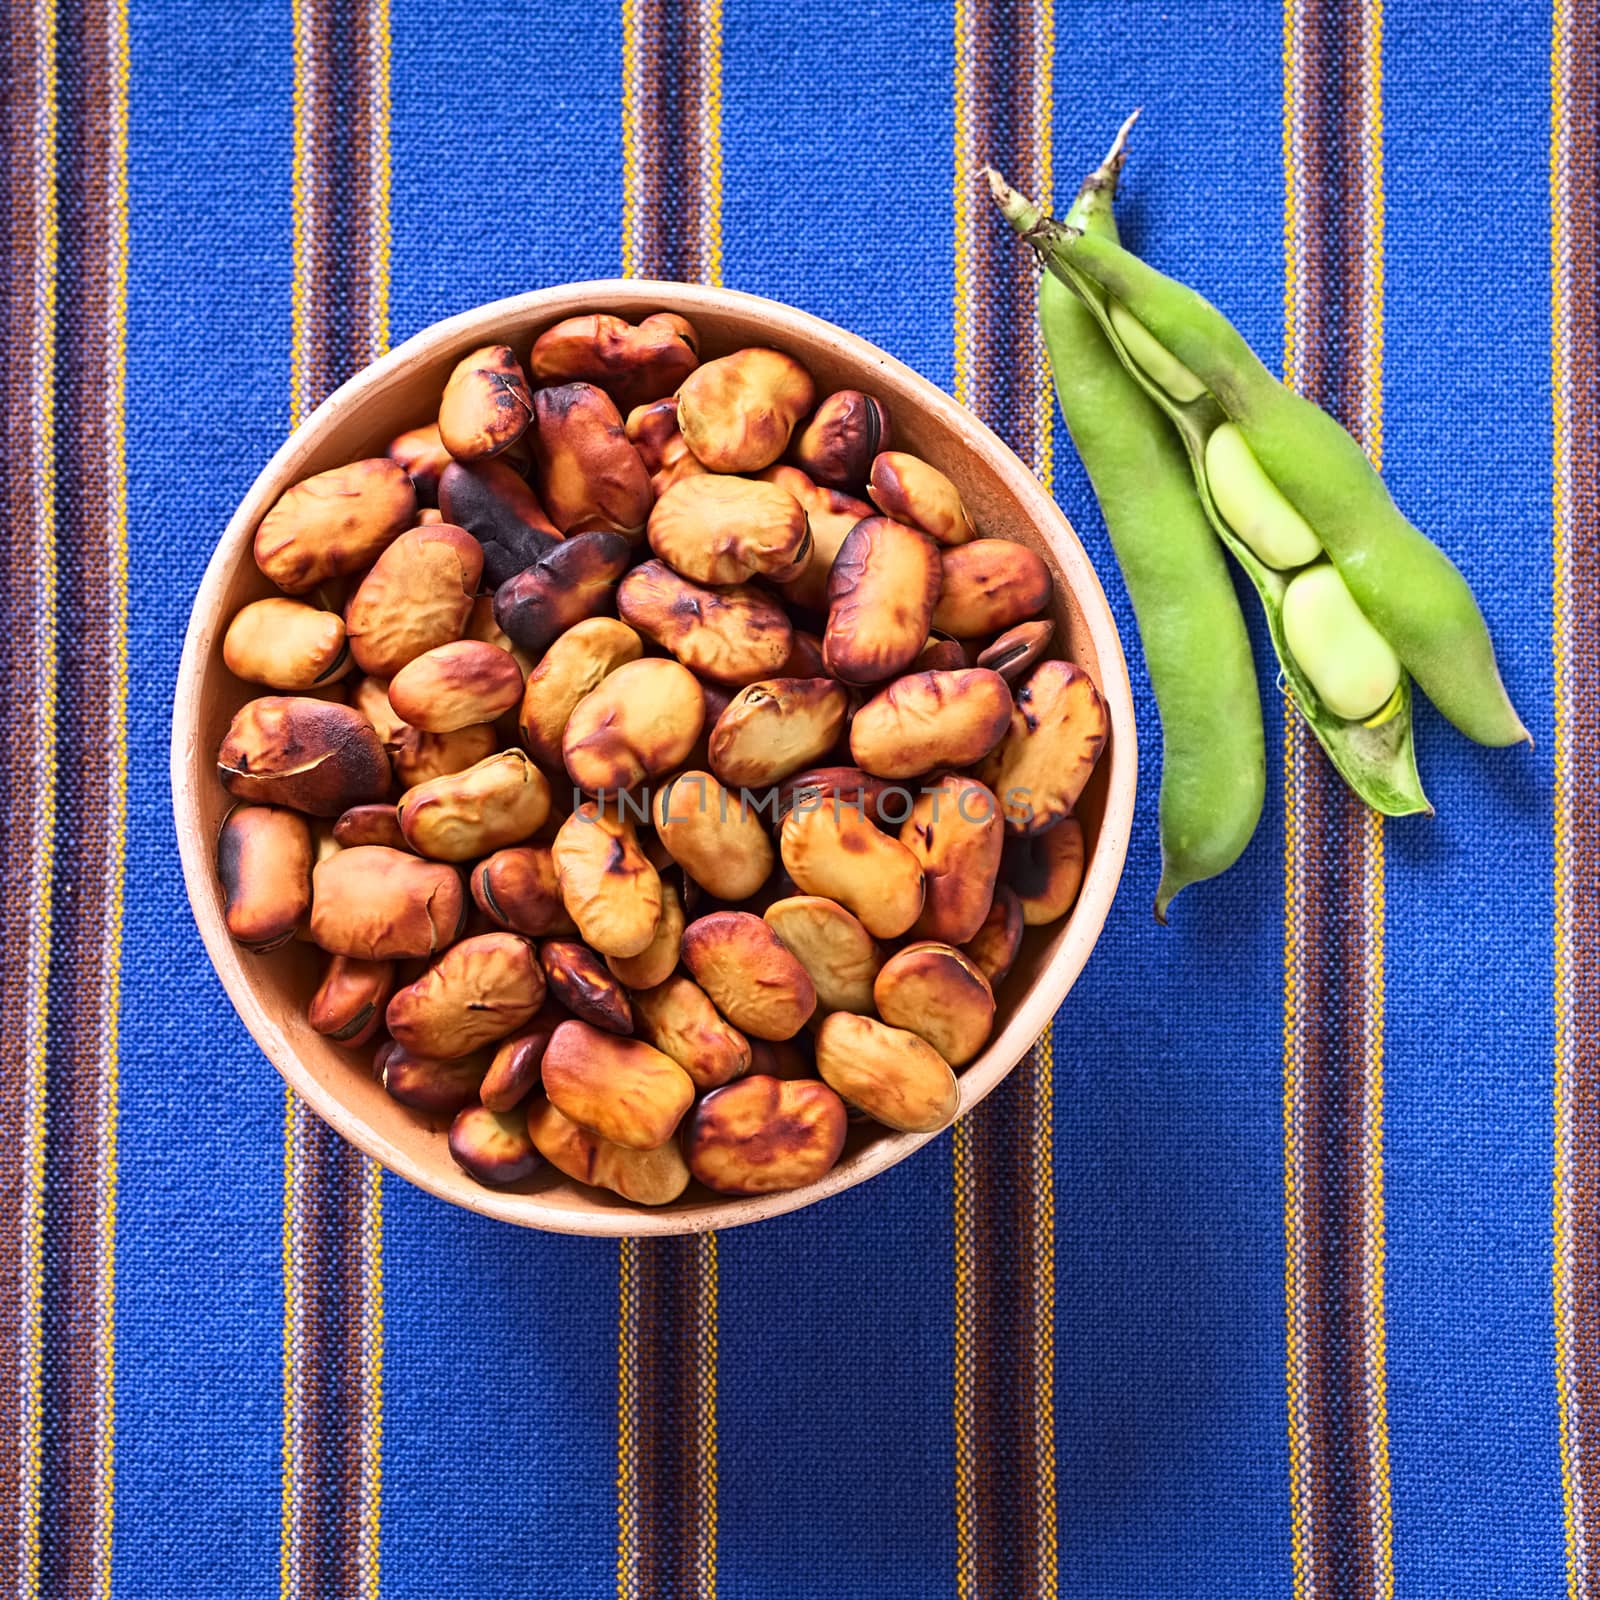 Toasted fava beans (lat. Vicia faba, South America: haba) eaten as snack in Bolivia, served in clay bowl with fresh green fava beans on the side, photographed with natural light (Selective Focus, Focus on the toasted beans)